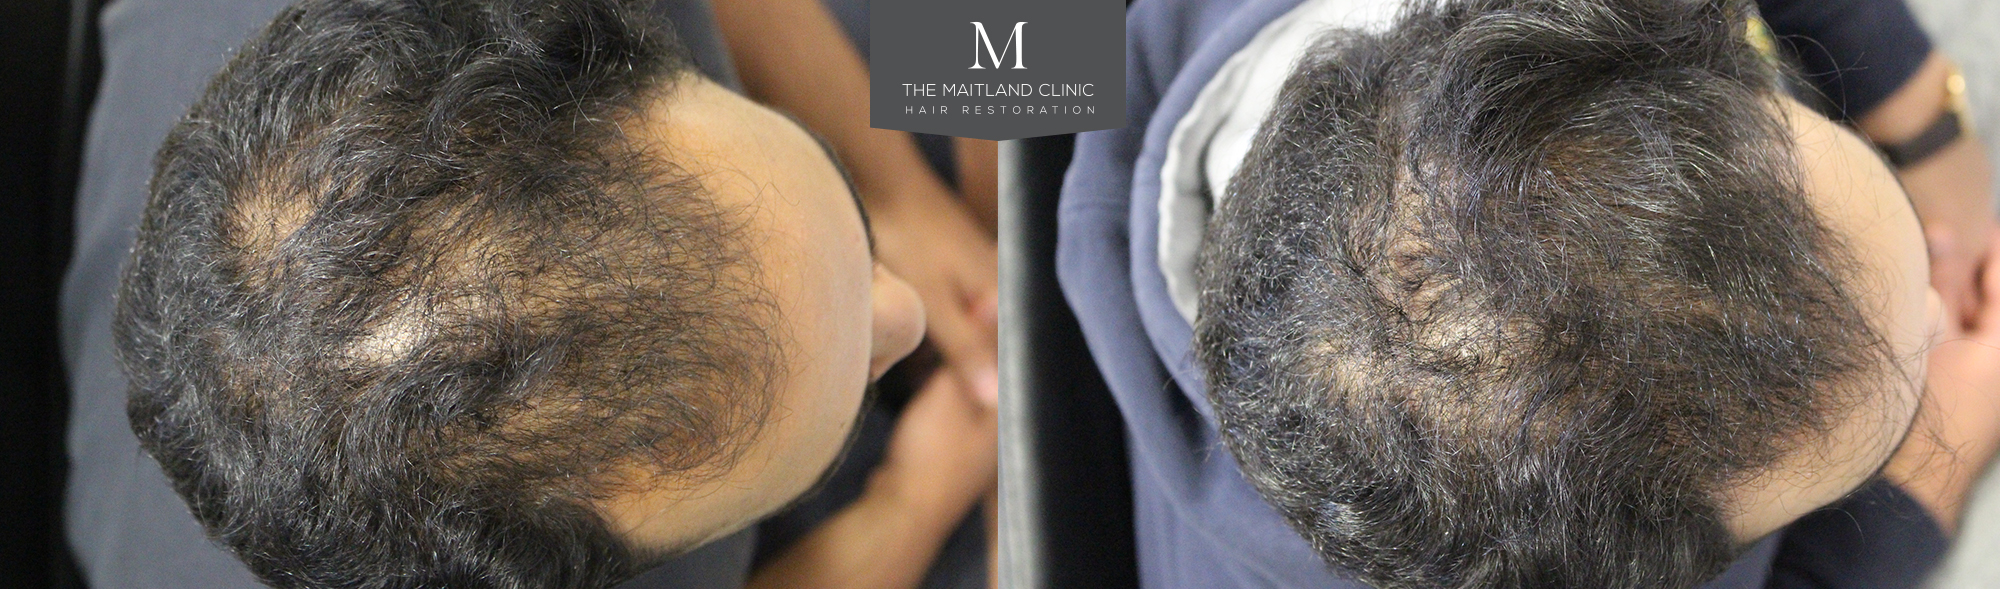 Before and after PRP treatment The Maitland Clinic